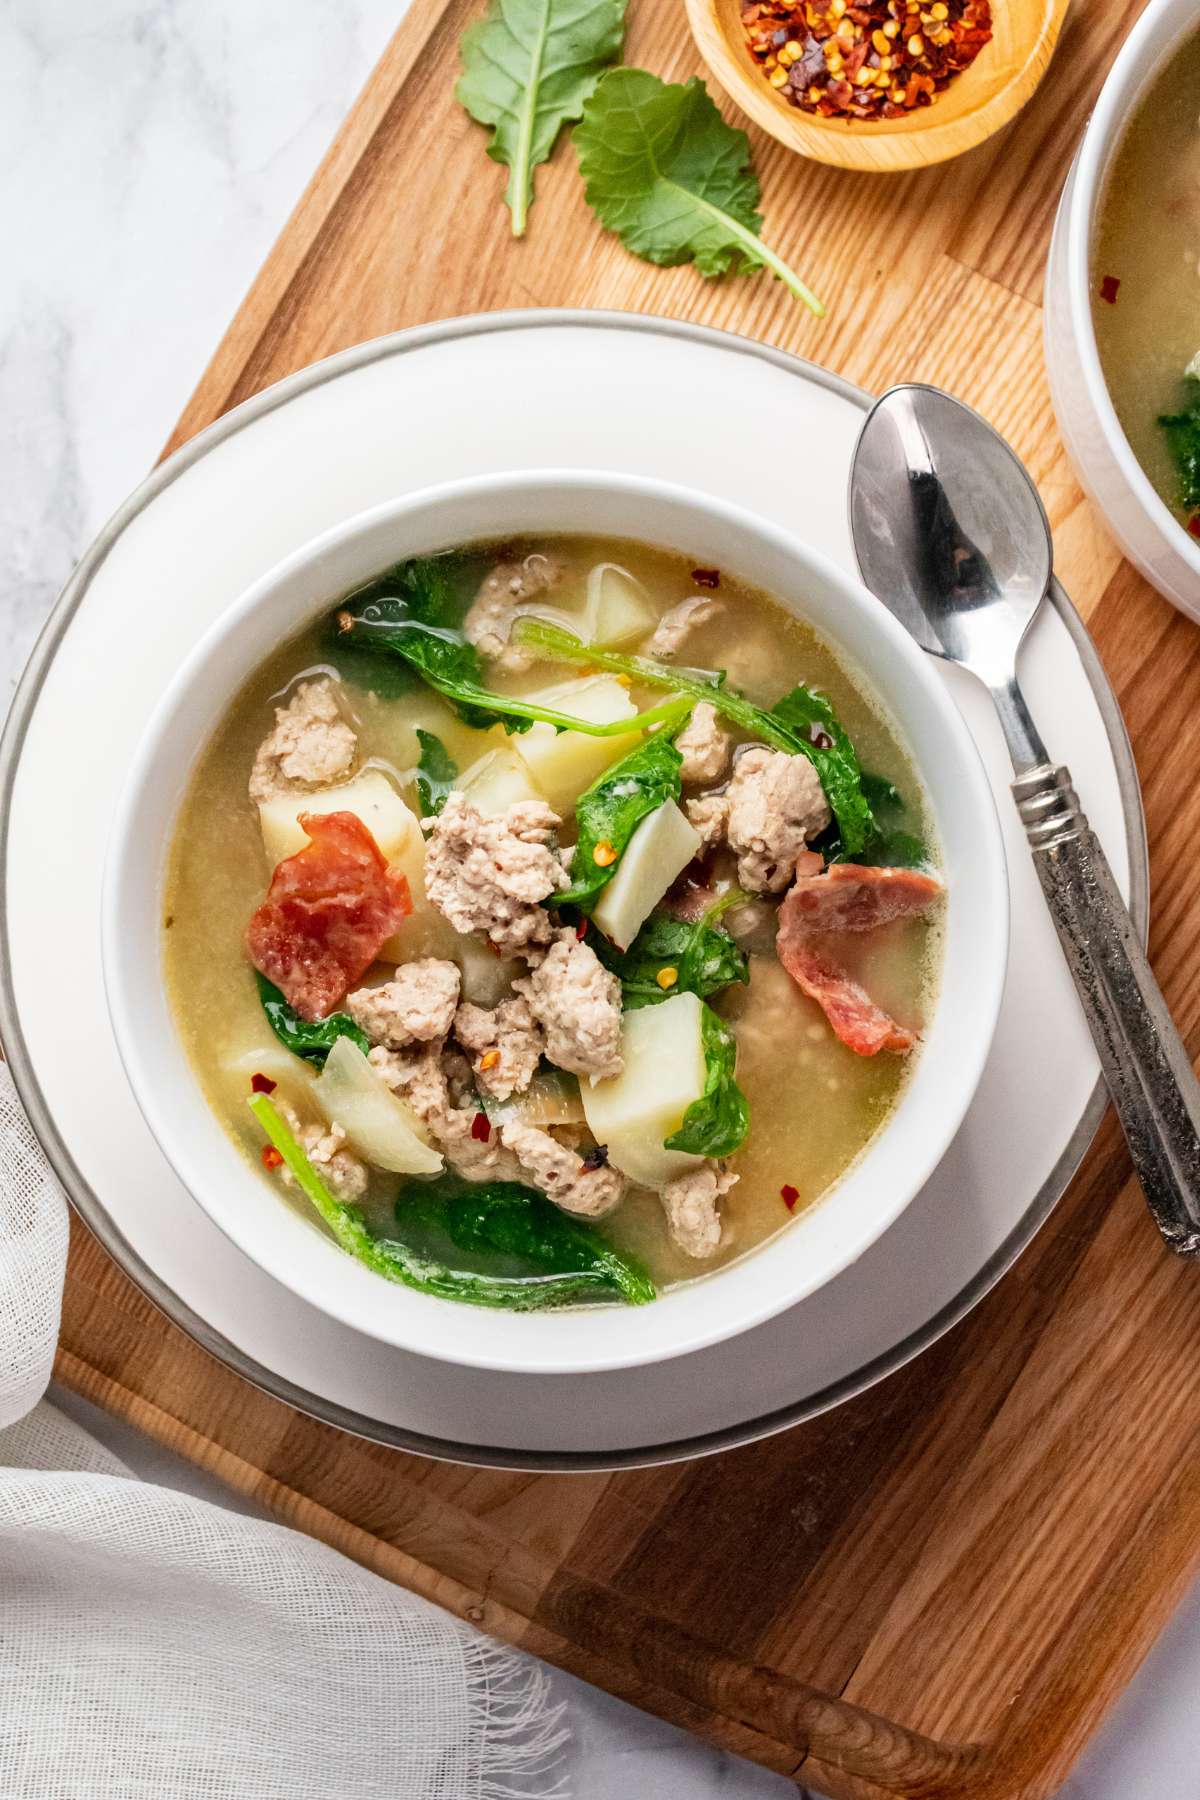 Skinny Zuppa Toscana! This lightened up twist is made with lightened up ingredients and insanely delicious! Creamy, savory and well balanced for a yummy winter meal. Gluten Free + Low Calorie + Paleo